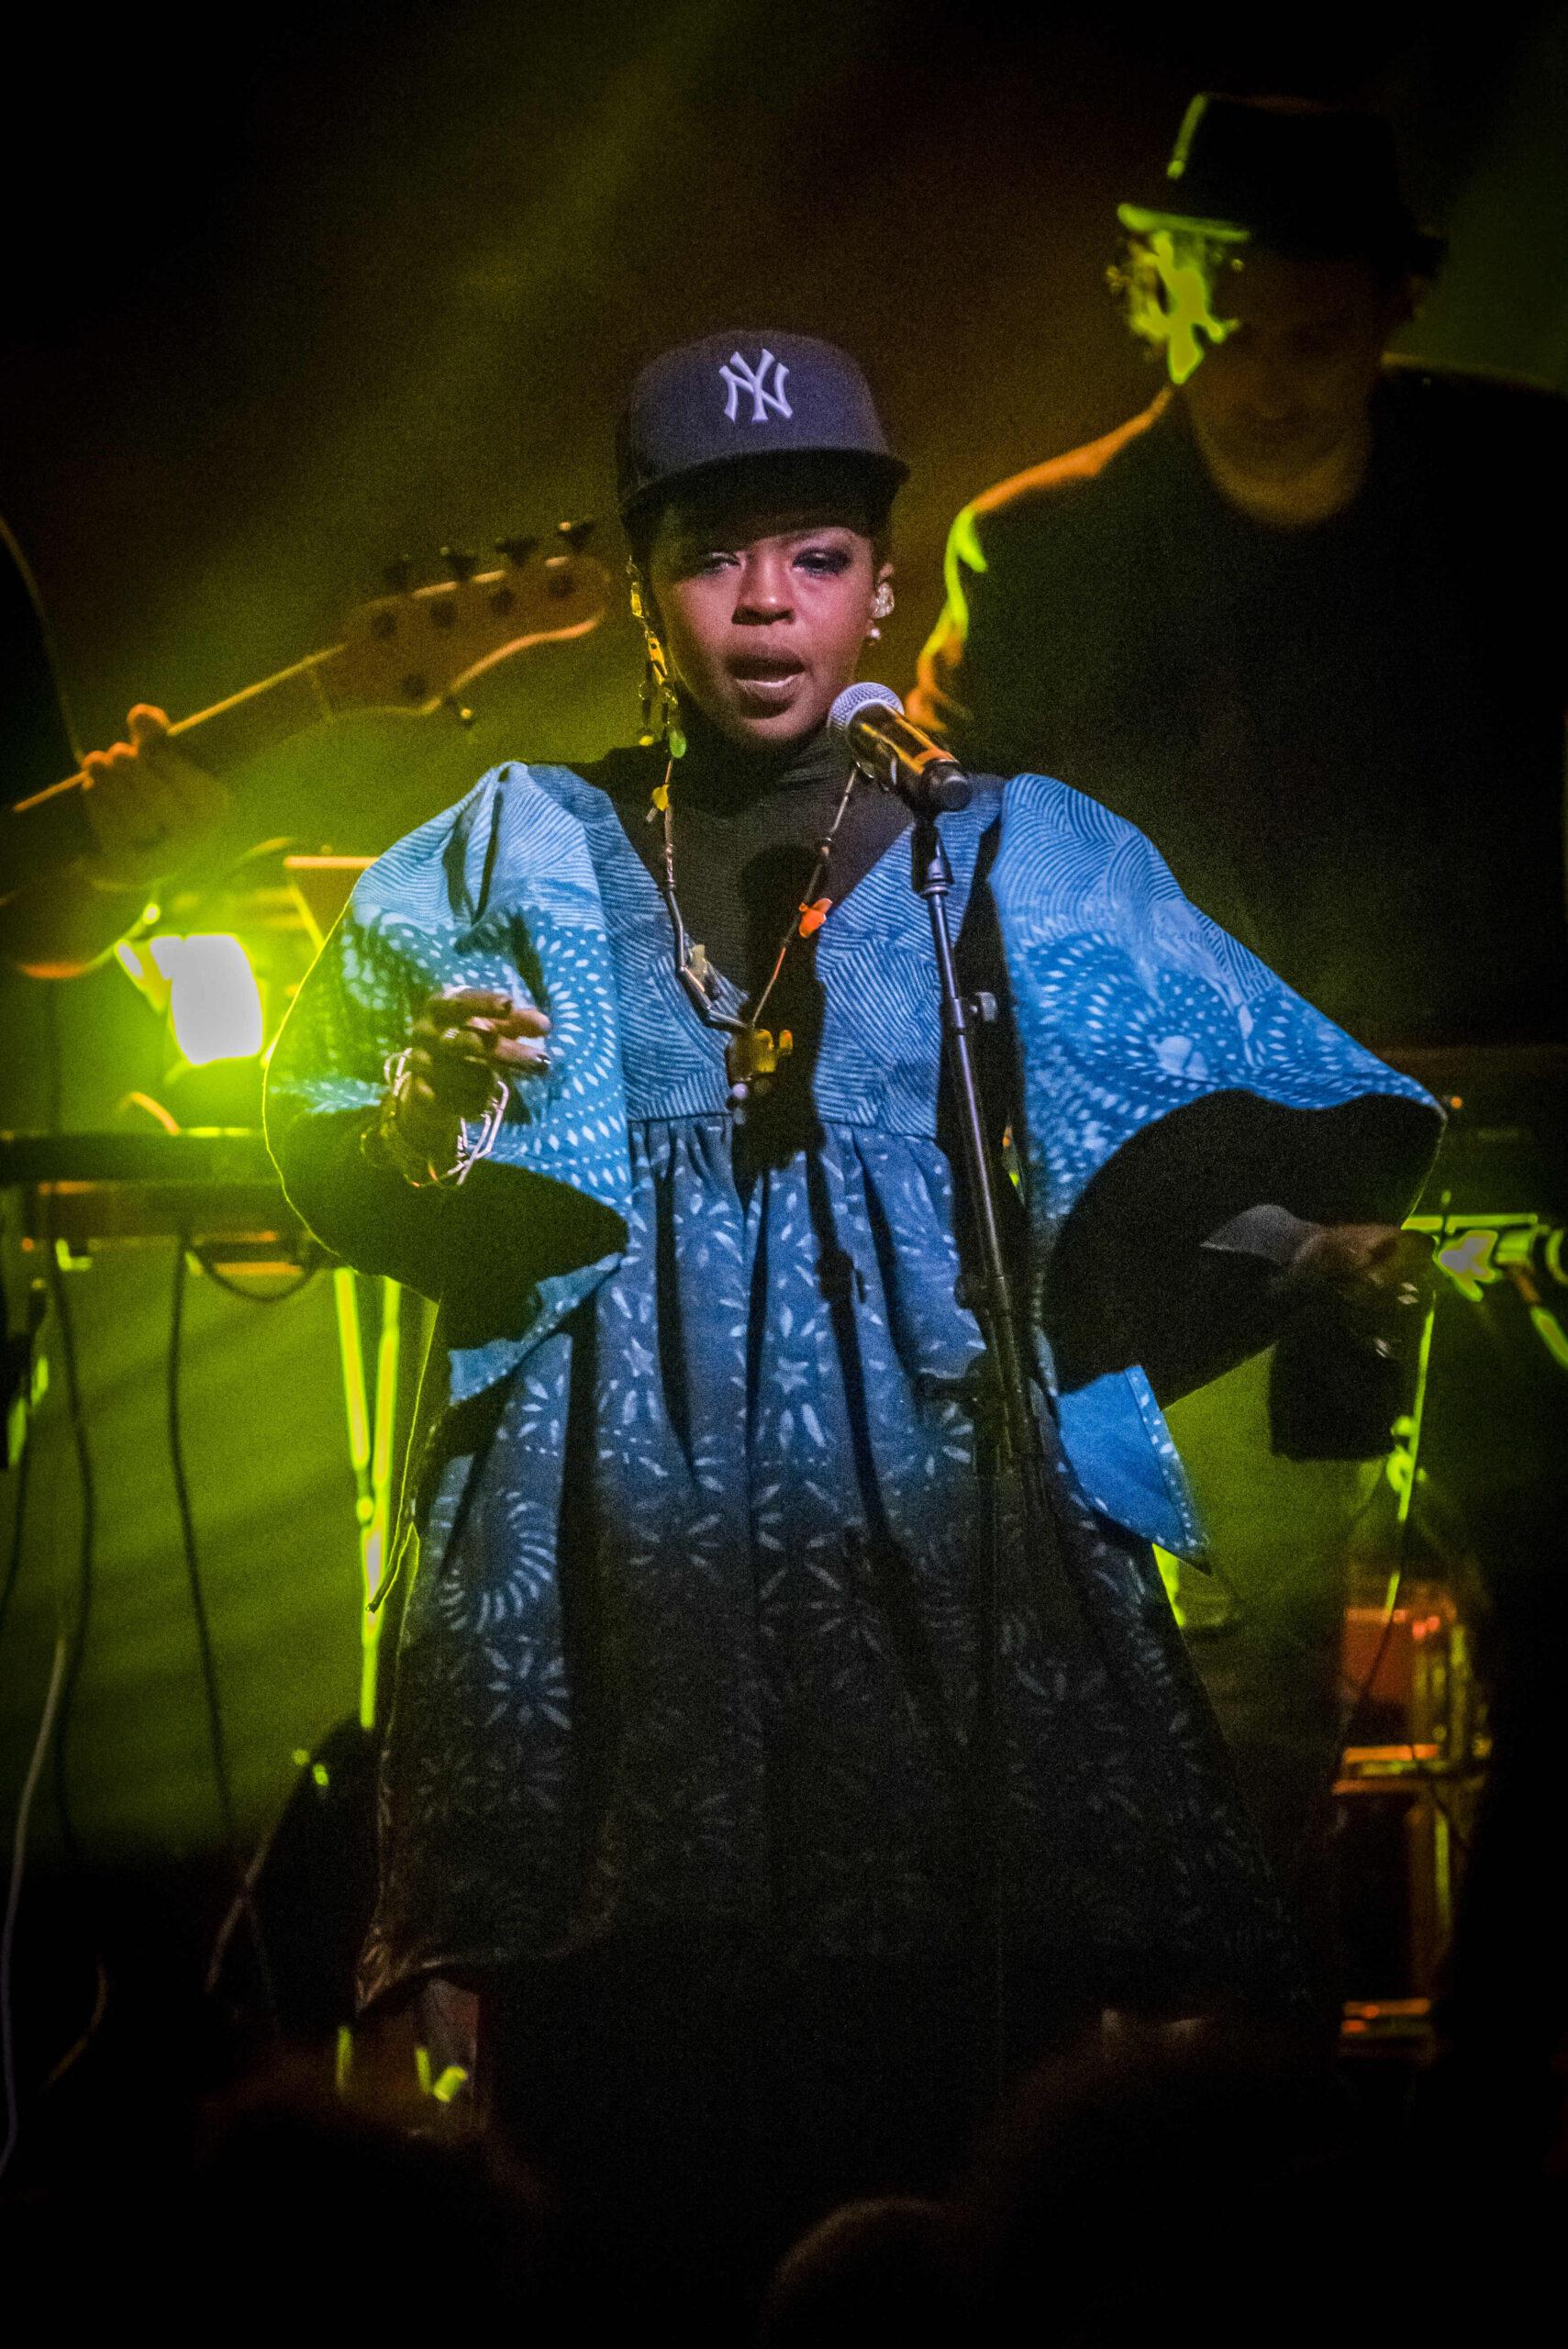 MS. LAURYN HILL during her second sold out show in Asheville, North Carolina